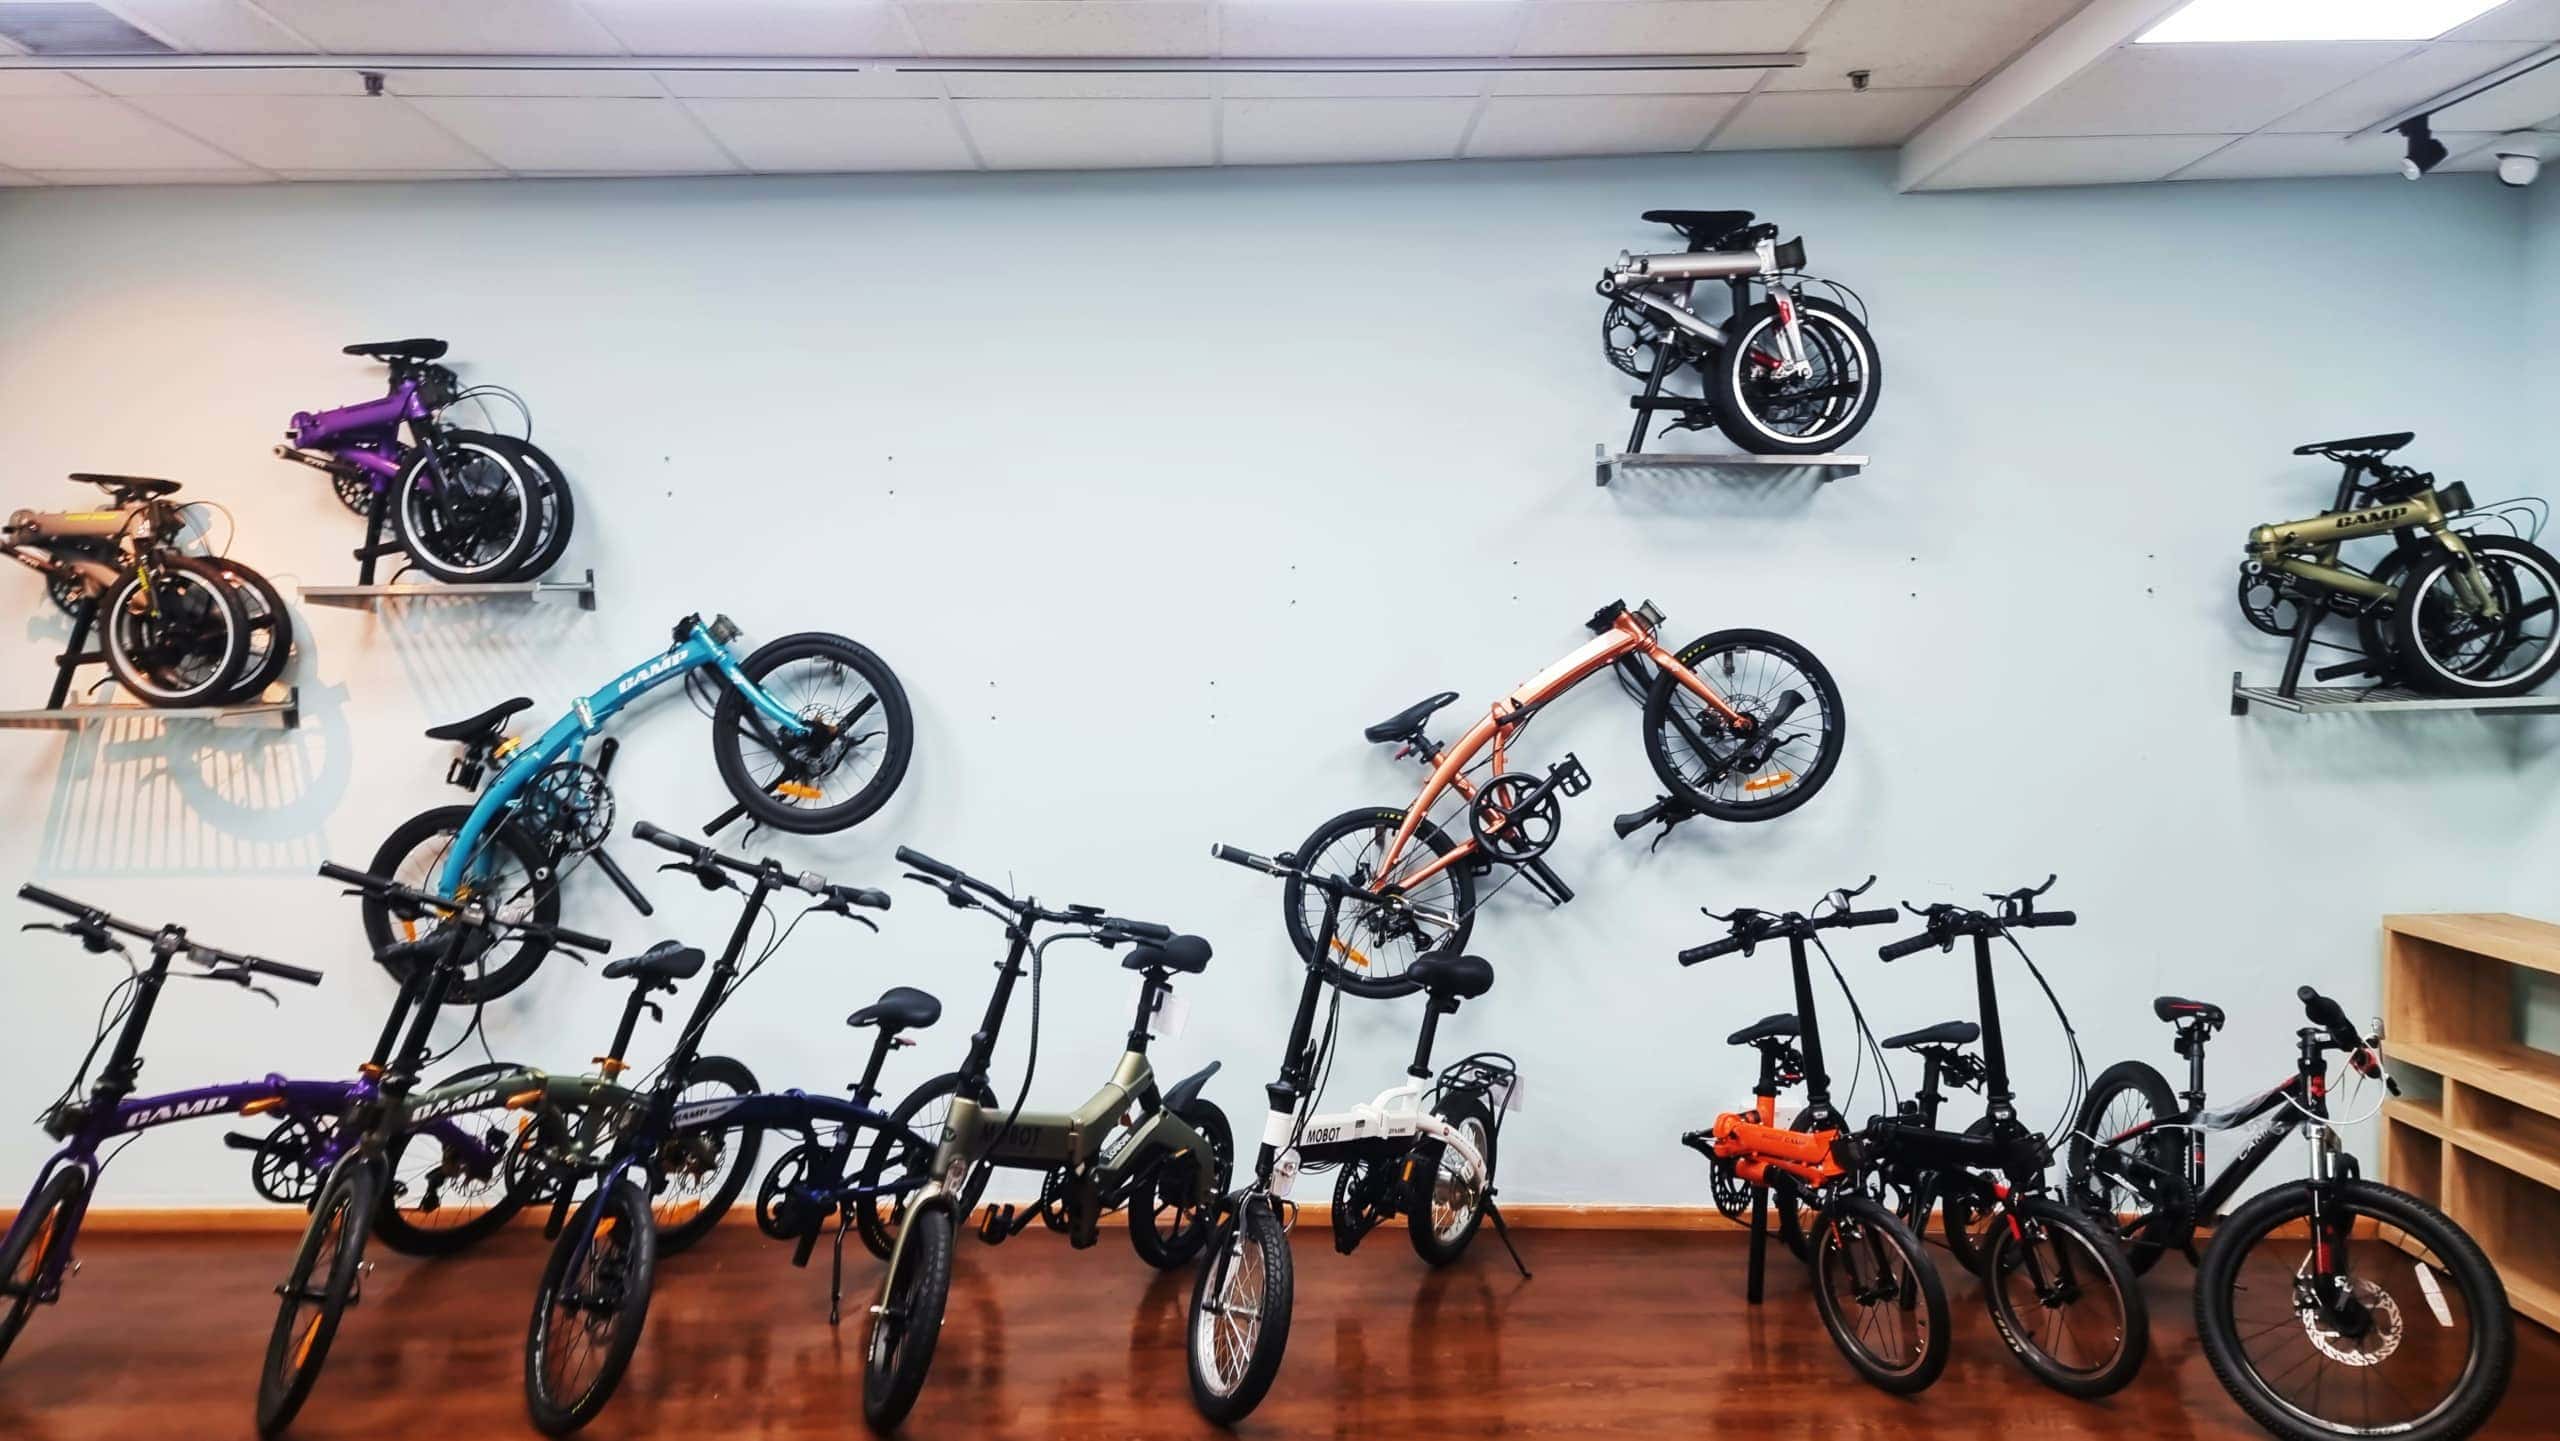 MOBOT CAMP Excelsior 4 scaled - Press release: MOBOT x CAMP Opens 4th Bicycle Shop In Excelsior Shopping Center